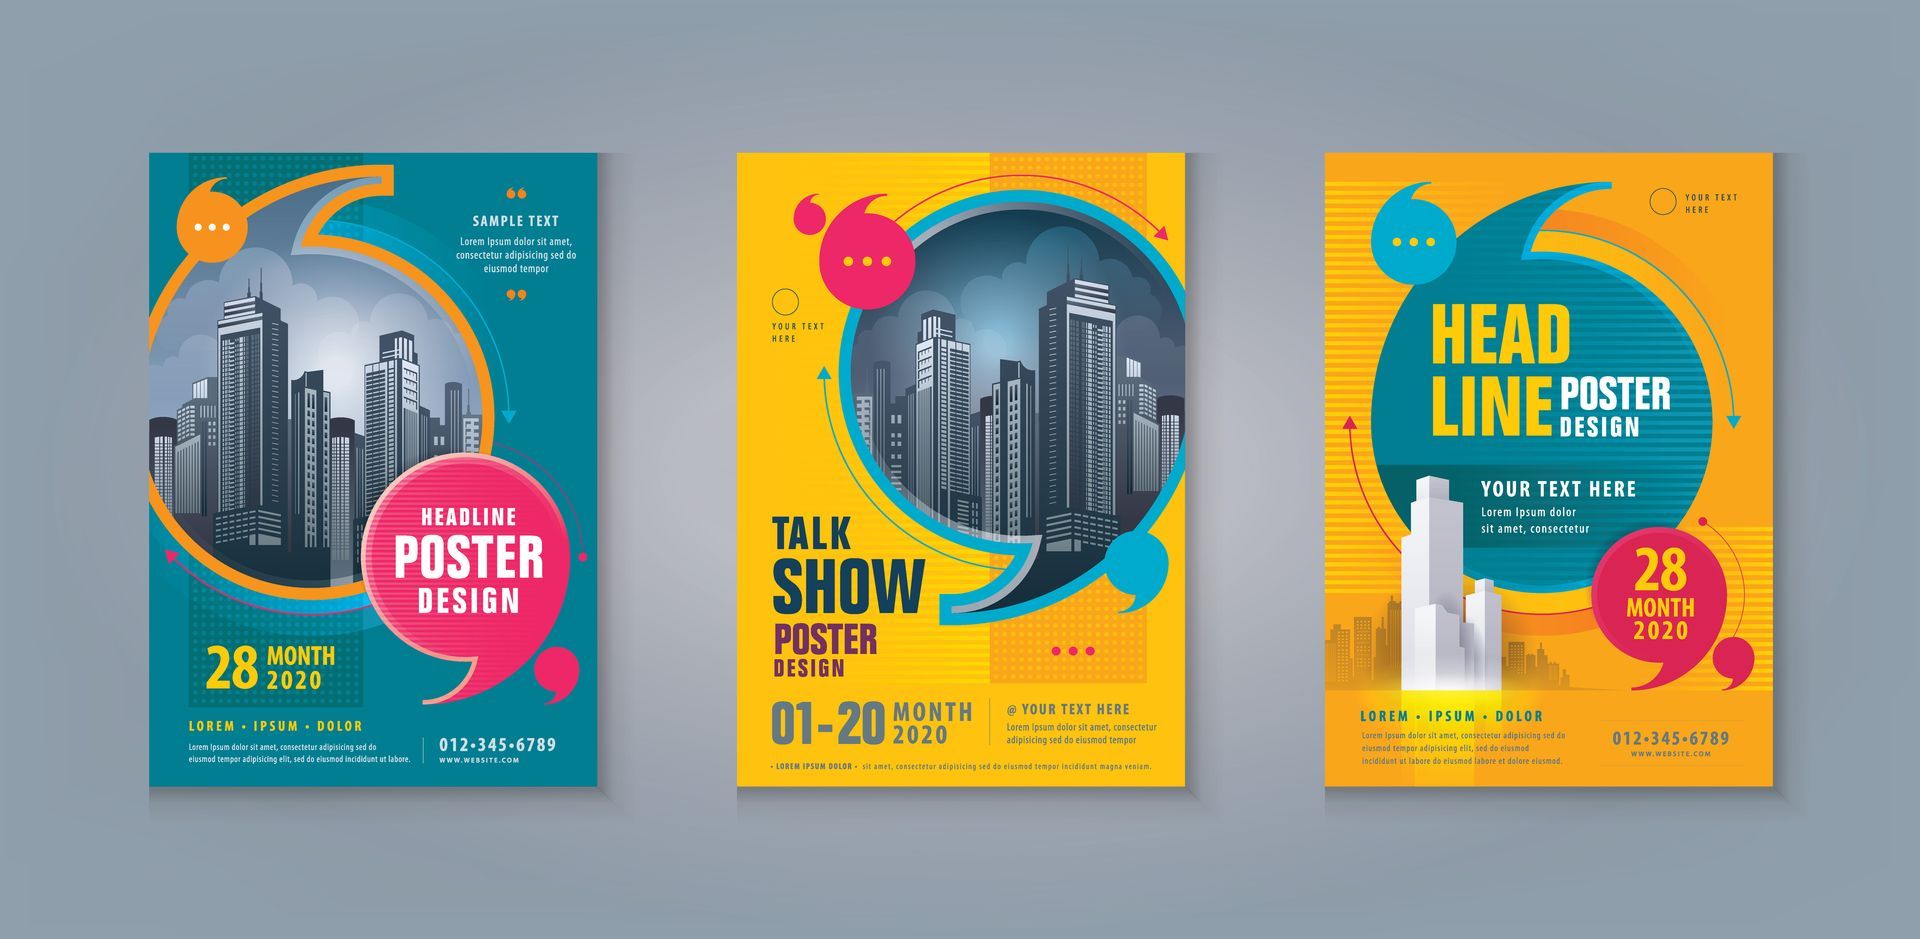 Costa Mesa Custom Posters For Conferences & Trade Shows